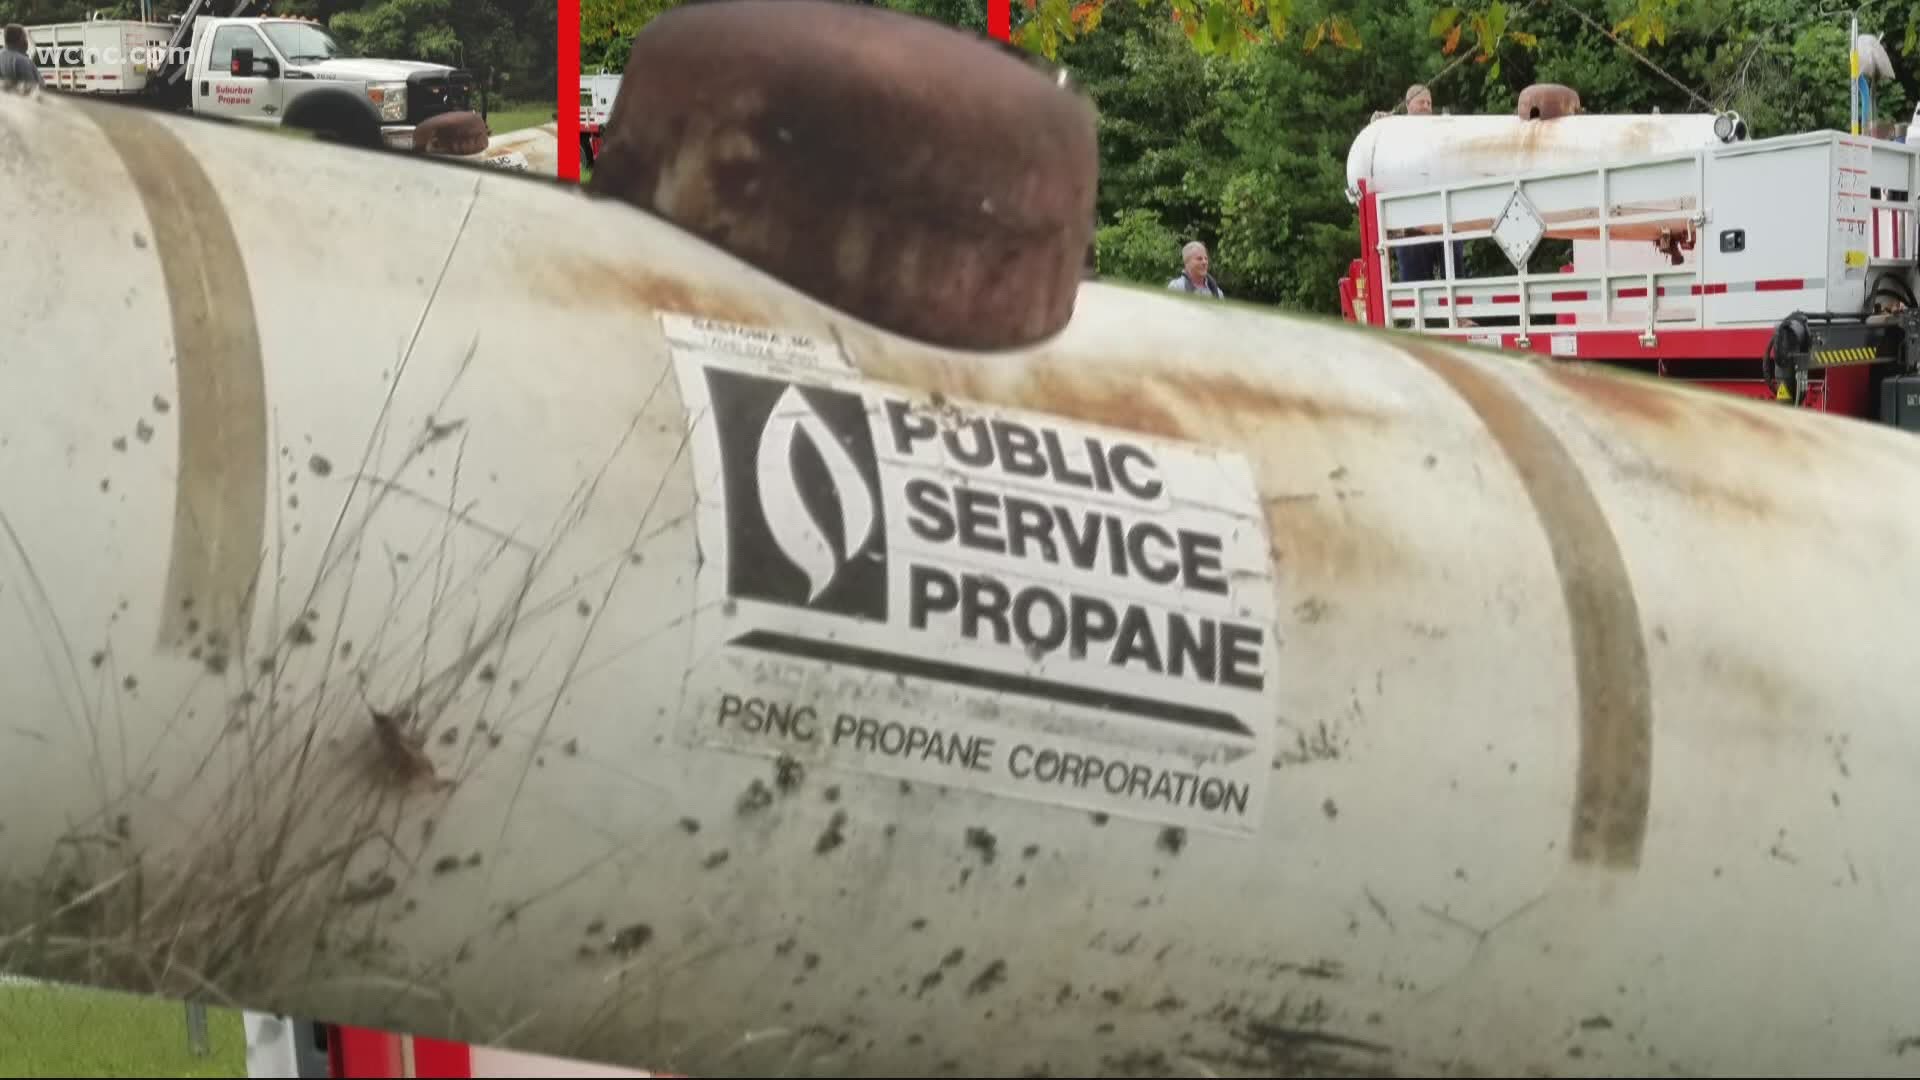 The homeowner had been trying to get rid of the propane tank for years. The 400-gallon tank hadn't been used in years, but the company wouldn't handle the issue.